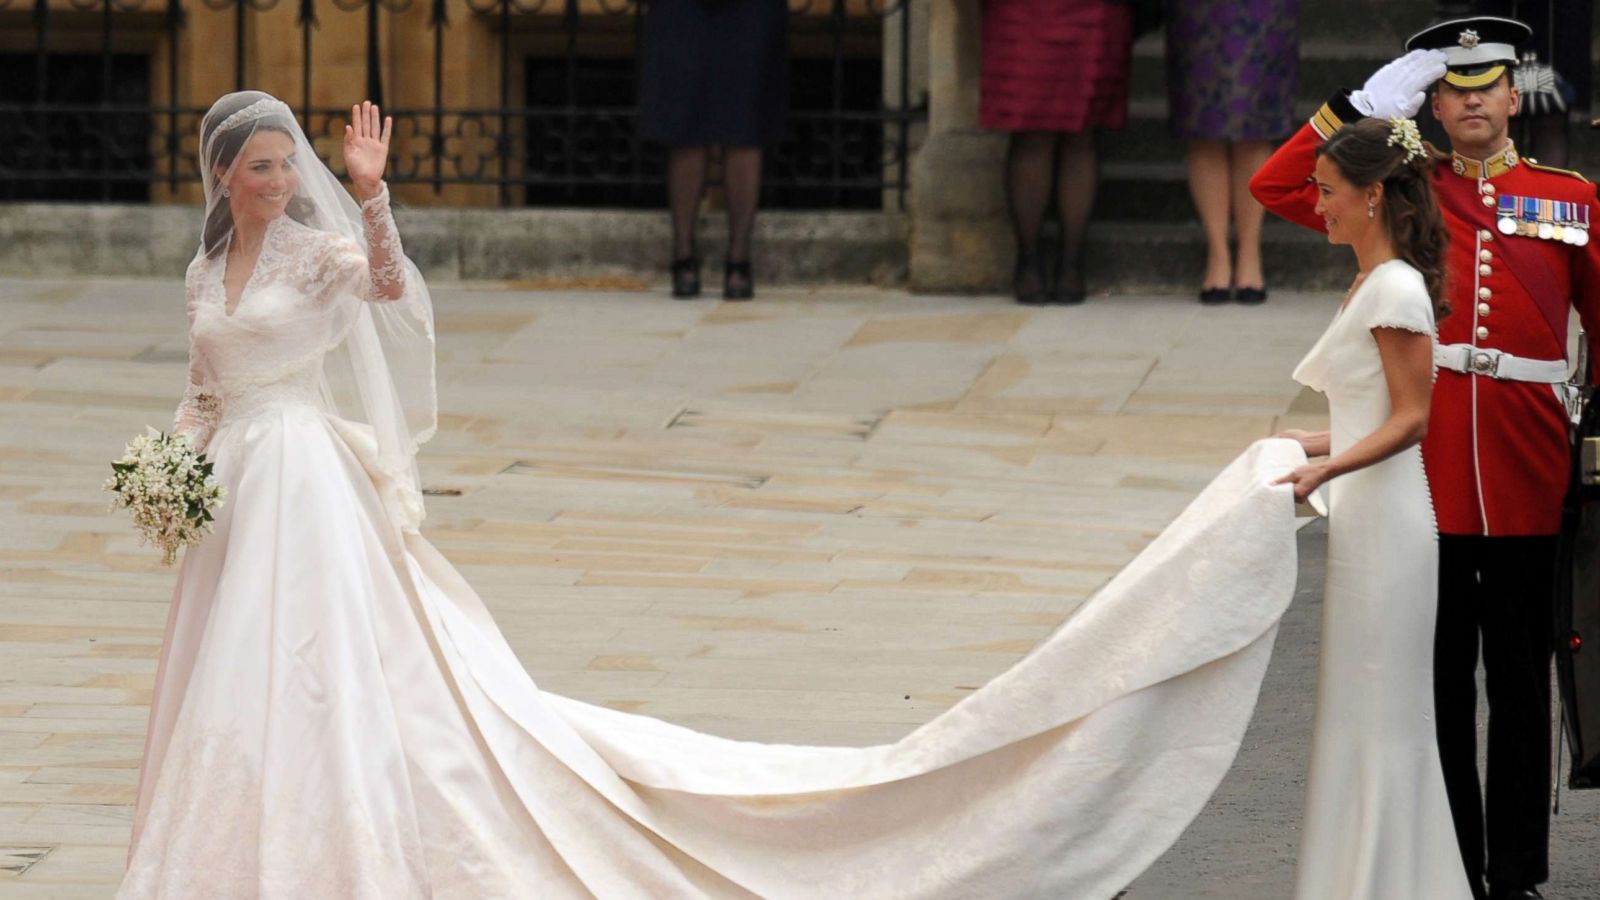 PHOTO: Kate Middleton waves as she arrives with her sister, the Maid of Honor Philippa (Pippa) Middleton at the West Door of Westminster Abbey in London for her wedding to Britain's Prince William, April 29, 2011.